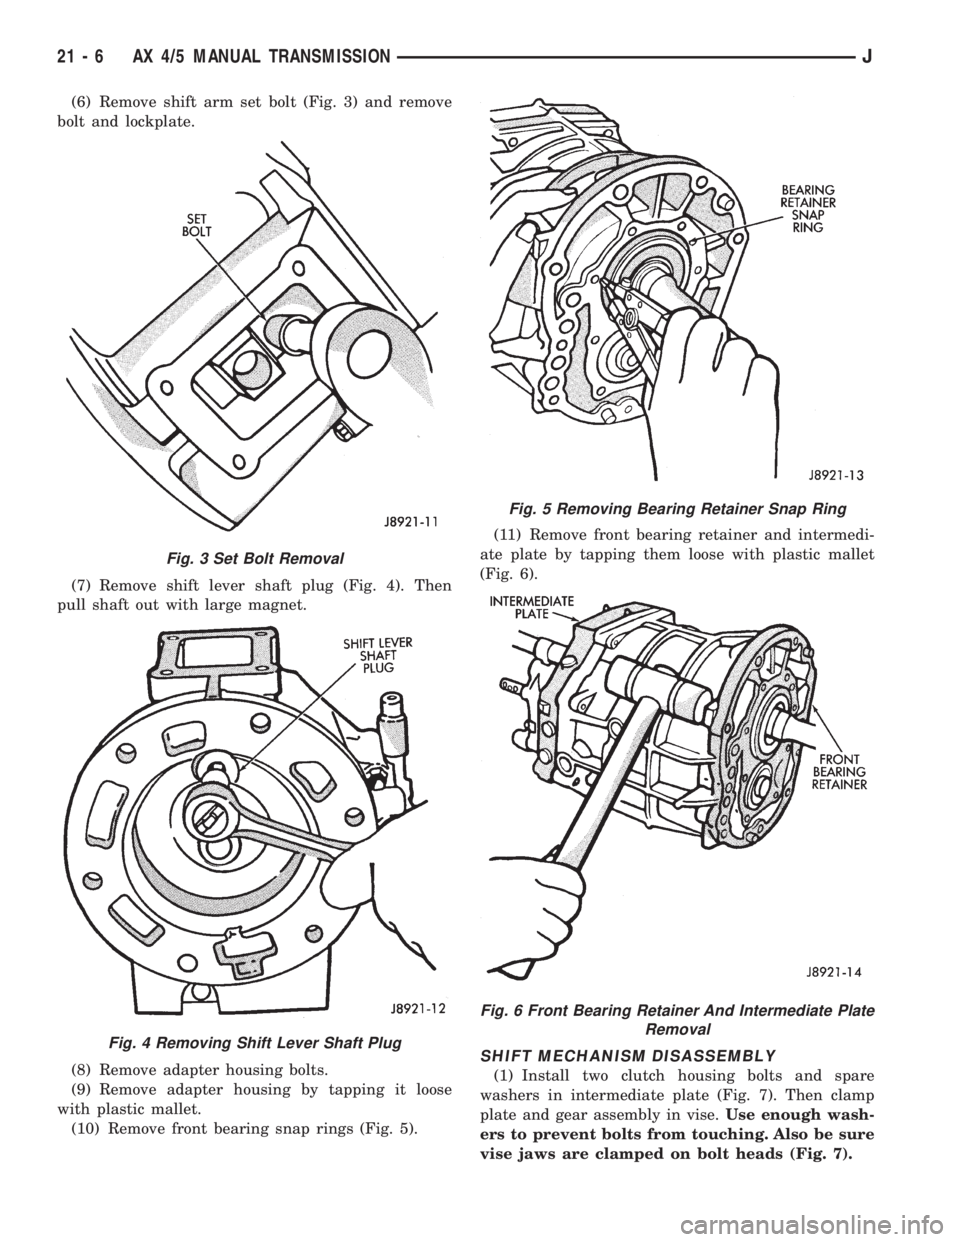 JEEP WRANGLER 1995  Owners Manual Fig. 4 Removing Shift Lever Shaft Plug
Fig. 5 Removing Bearing Retainer Snap Ring
Fig. 6 Front Bearing Retainer And Intermediate Plate
Removal
21 - 6 AX 4/5 MANUAL TRANSMISSIONJ 